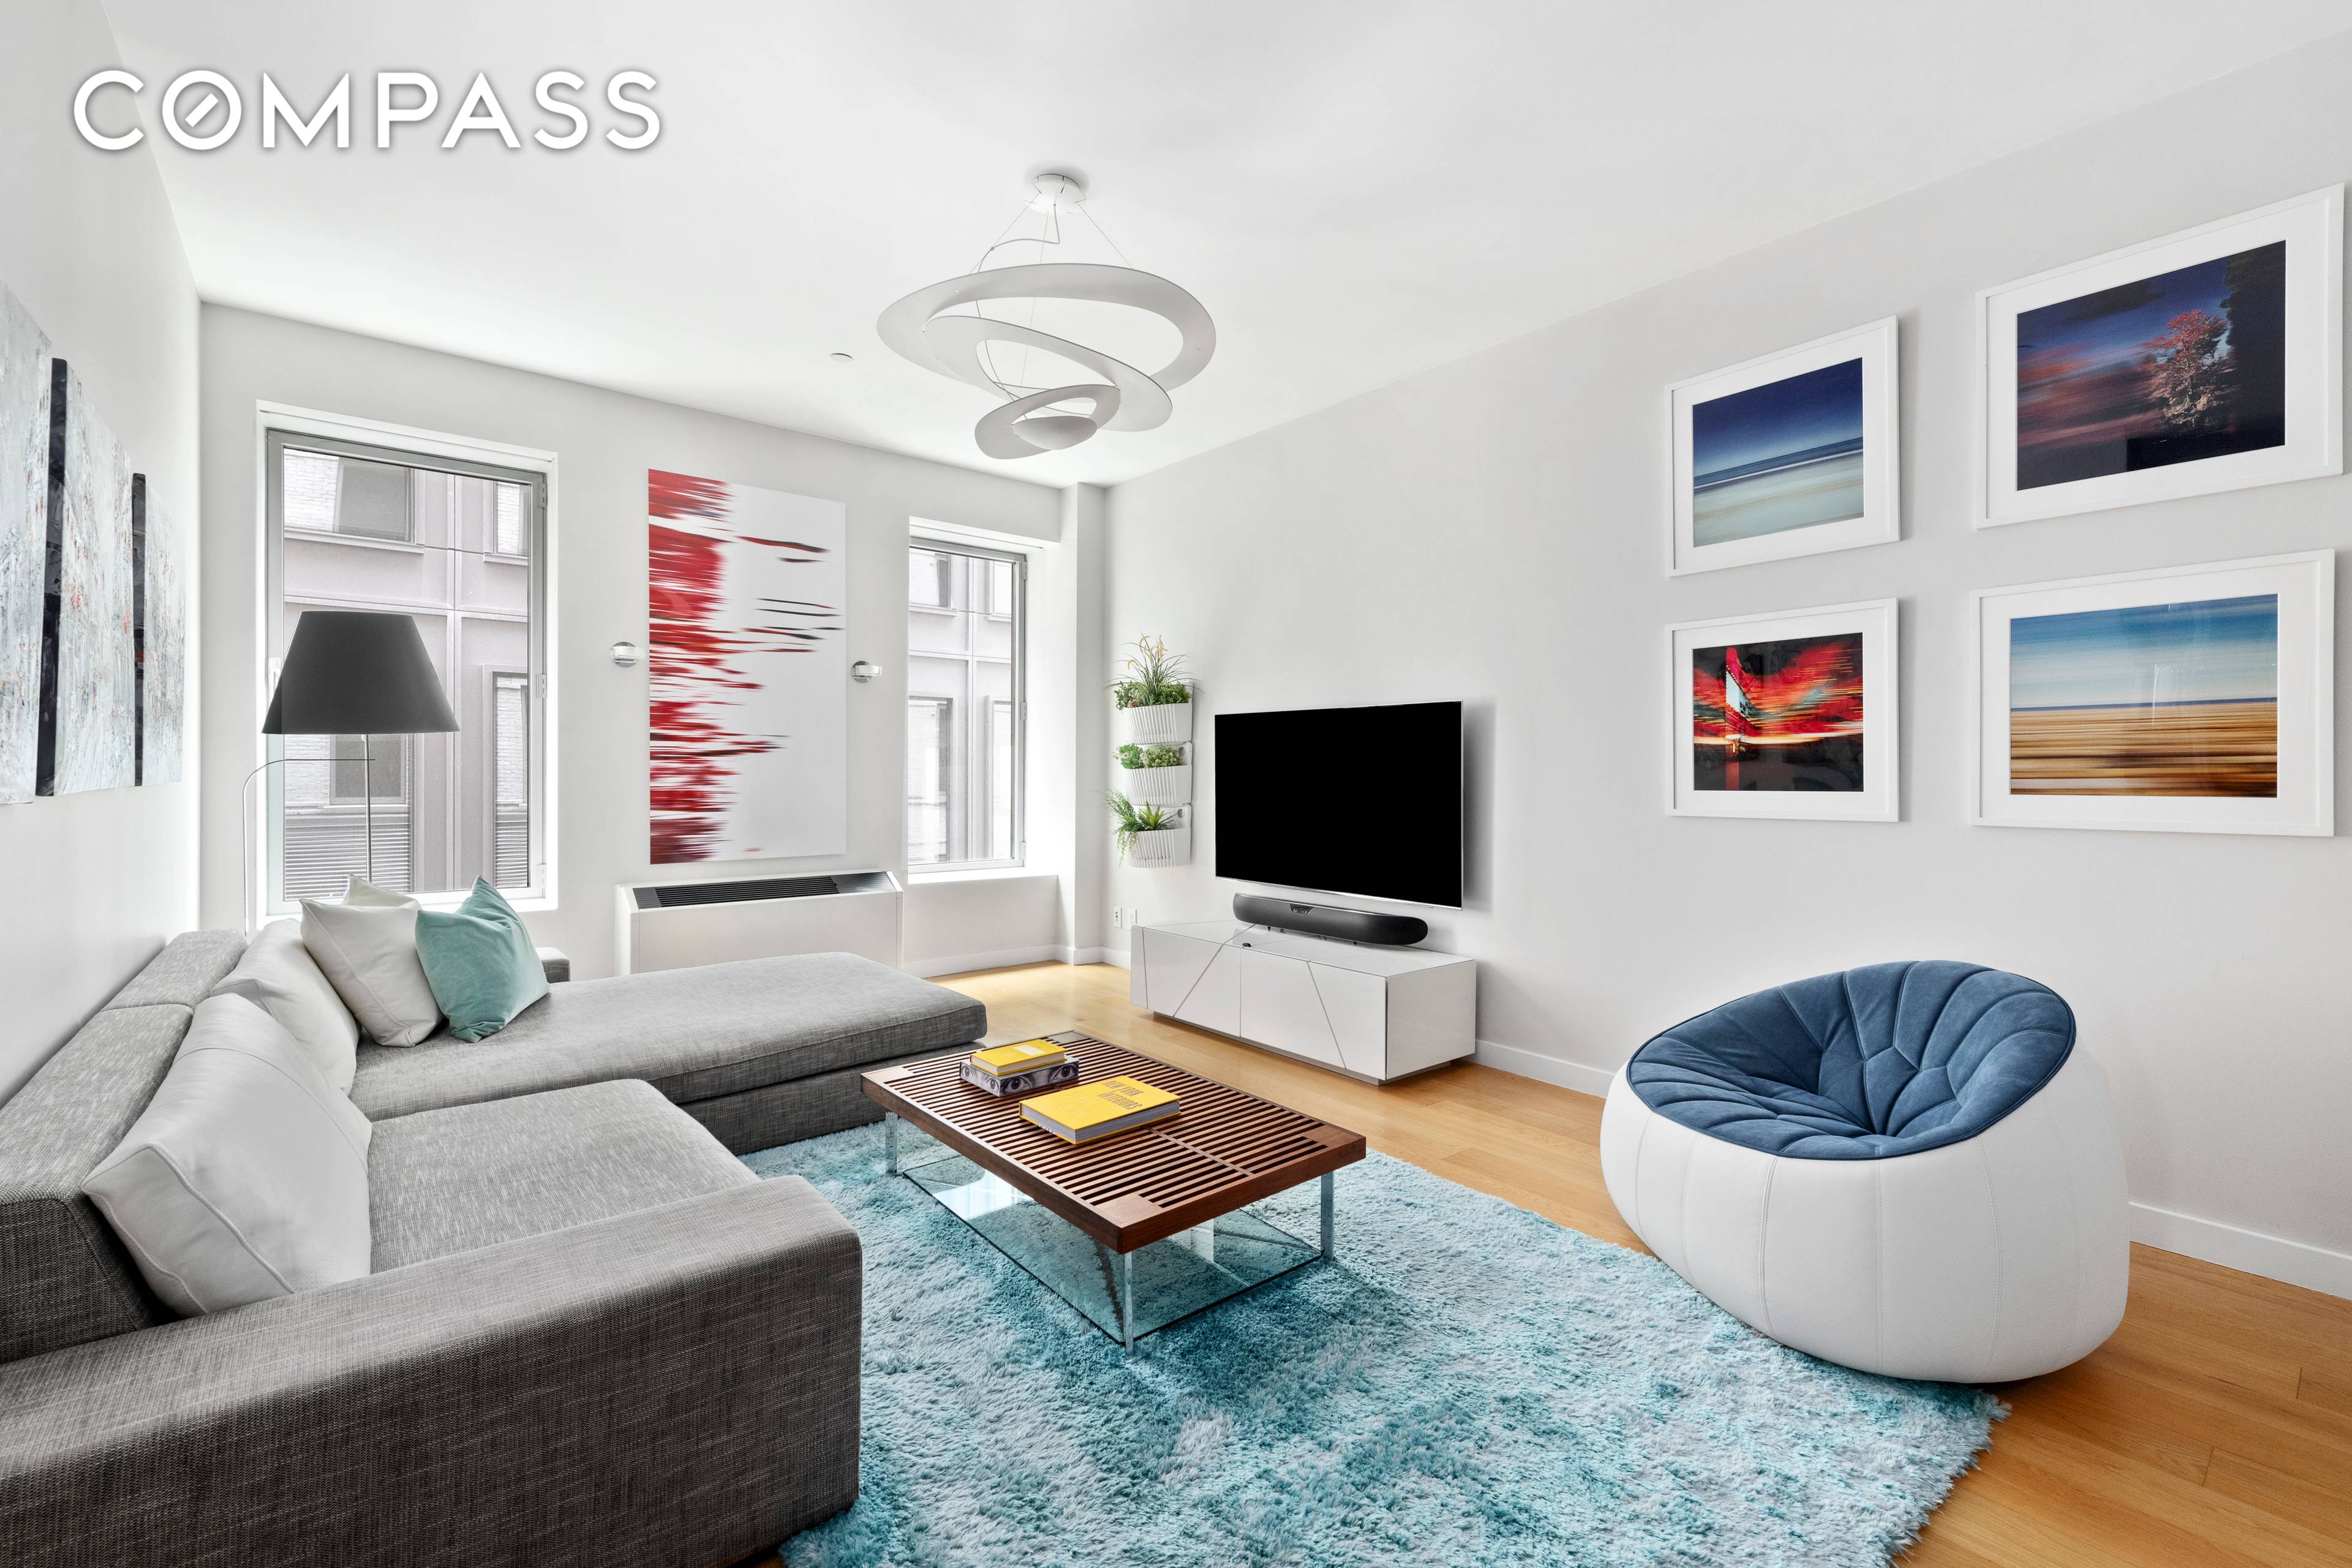 Don't miss your chance to experience the ultimate TriBeCa living in this spacious one bedroom, one bathroom apartment !